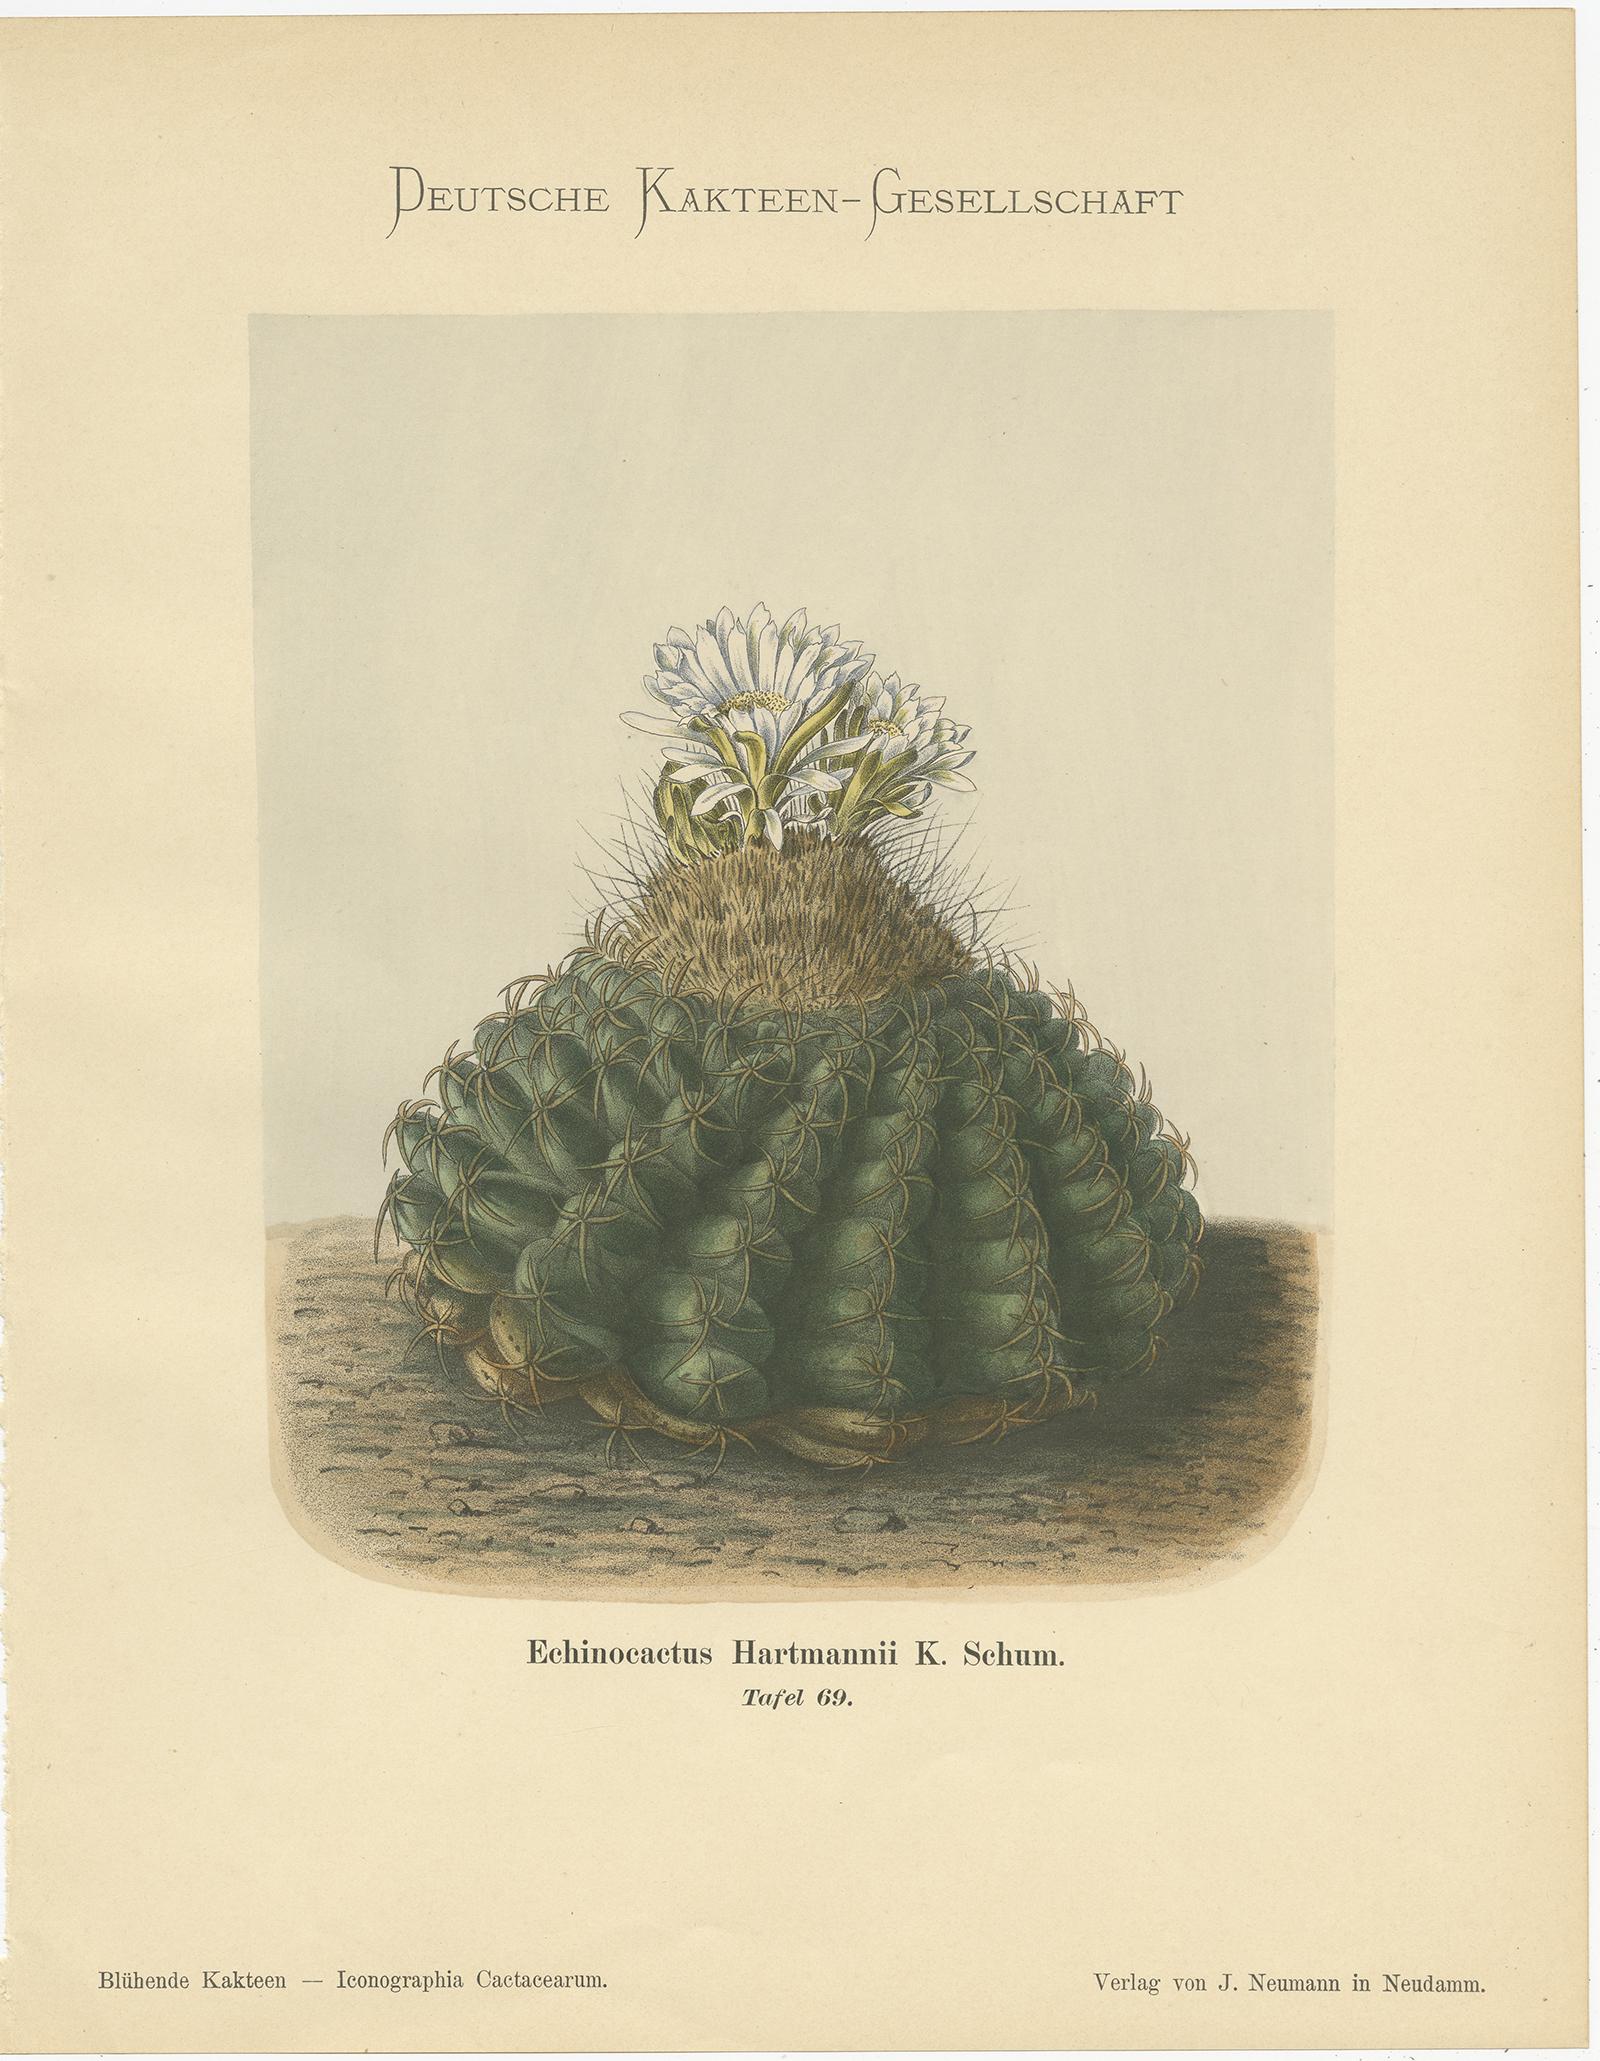 Set of four antique cactus prints depicting the Echinocactus Hartmannii, Echinocereus Blankii, Mamillaria Spinosissima and the Echinopsis Eyriesii and the Mamillaria Longimamma. These prints originate from 'Blühende Kakteen' by K. Schumann and M.